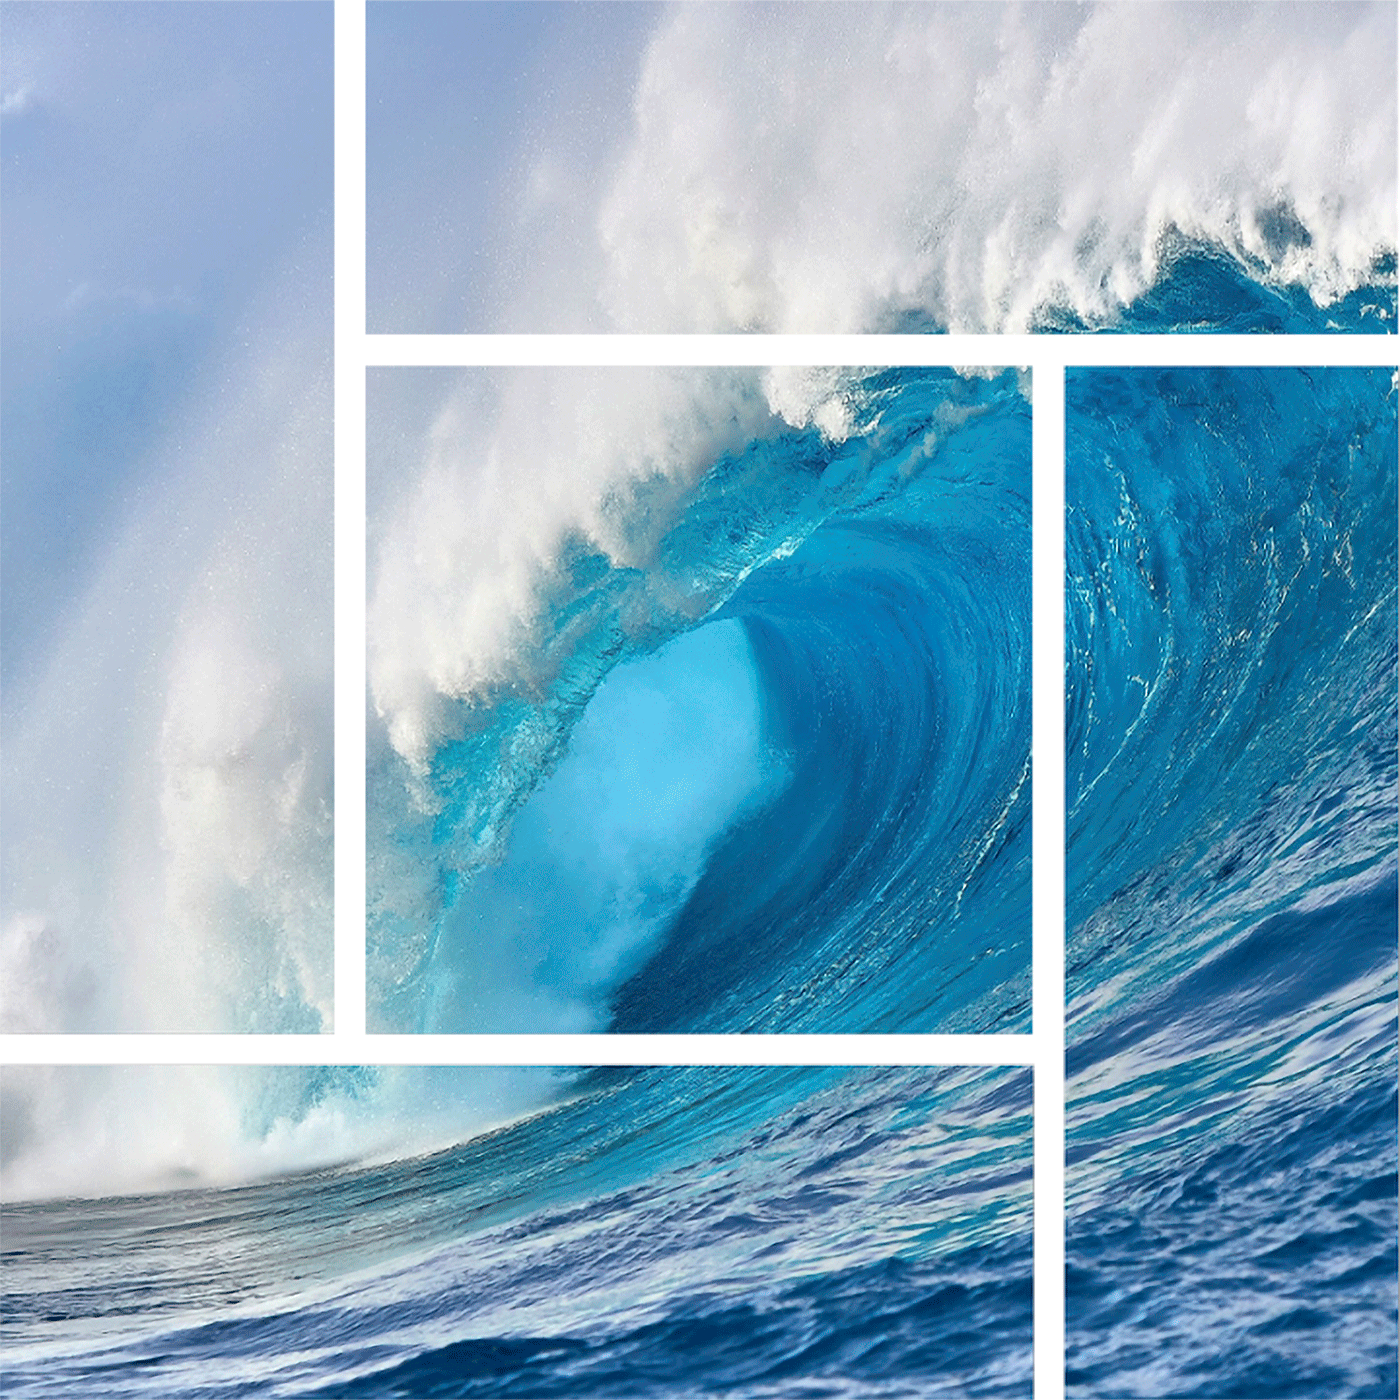 multiple panel wave parquet swirl photograph of the Hawaiian wave known Jaws or Peahi by nature photographer Andrew Shoemaker